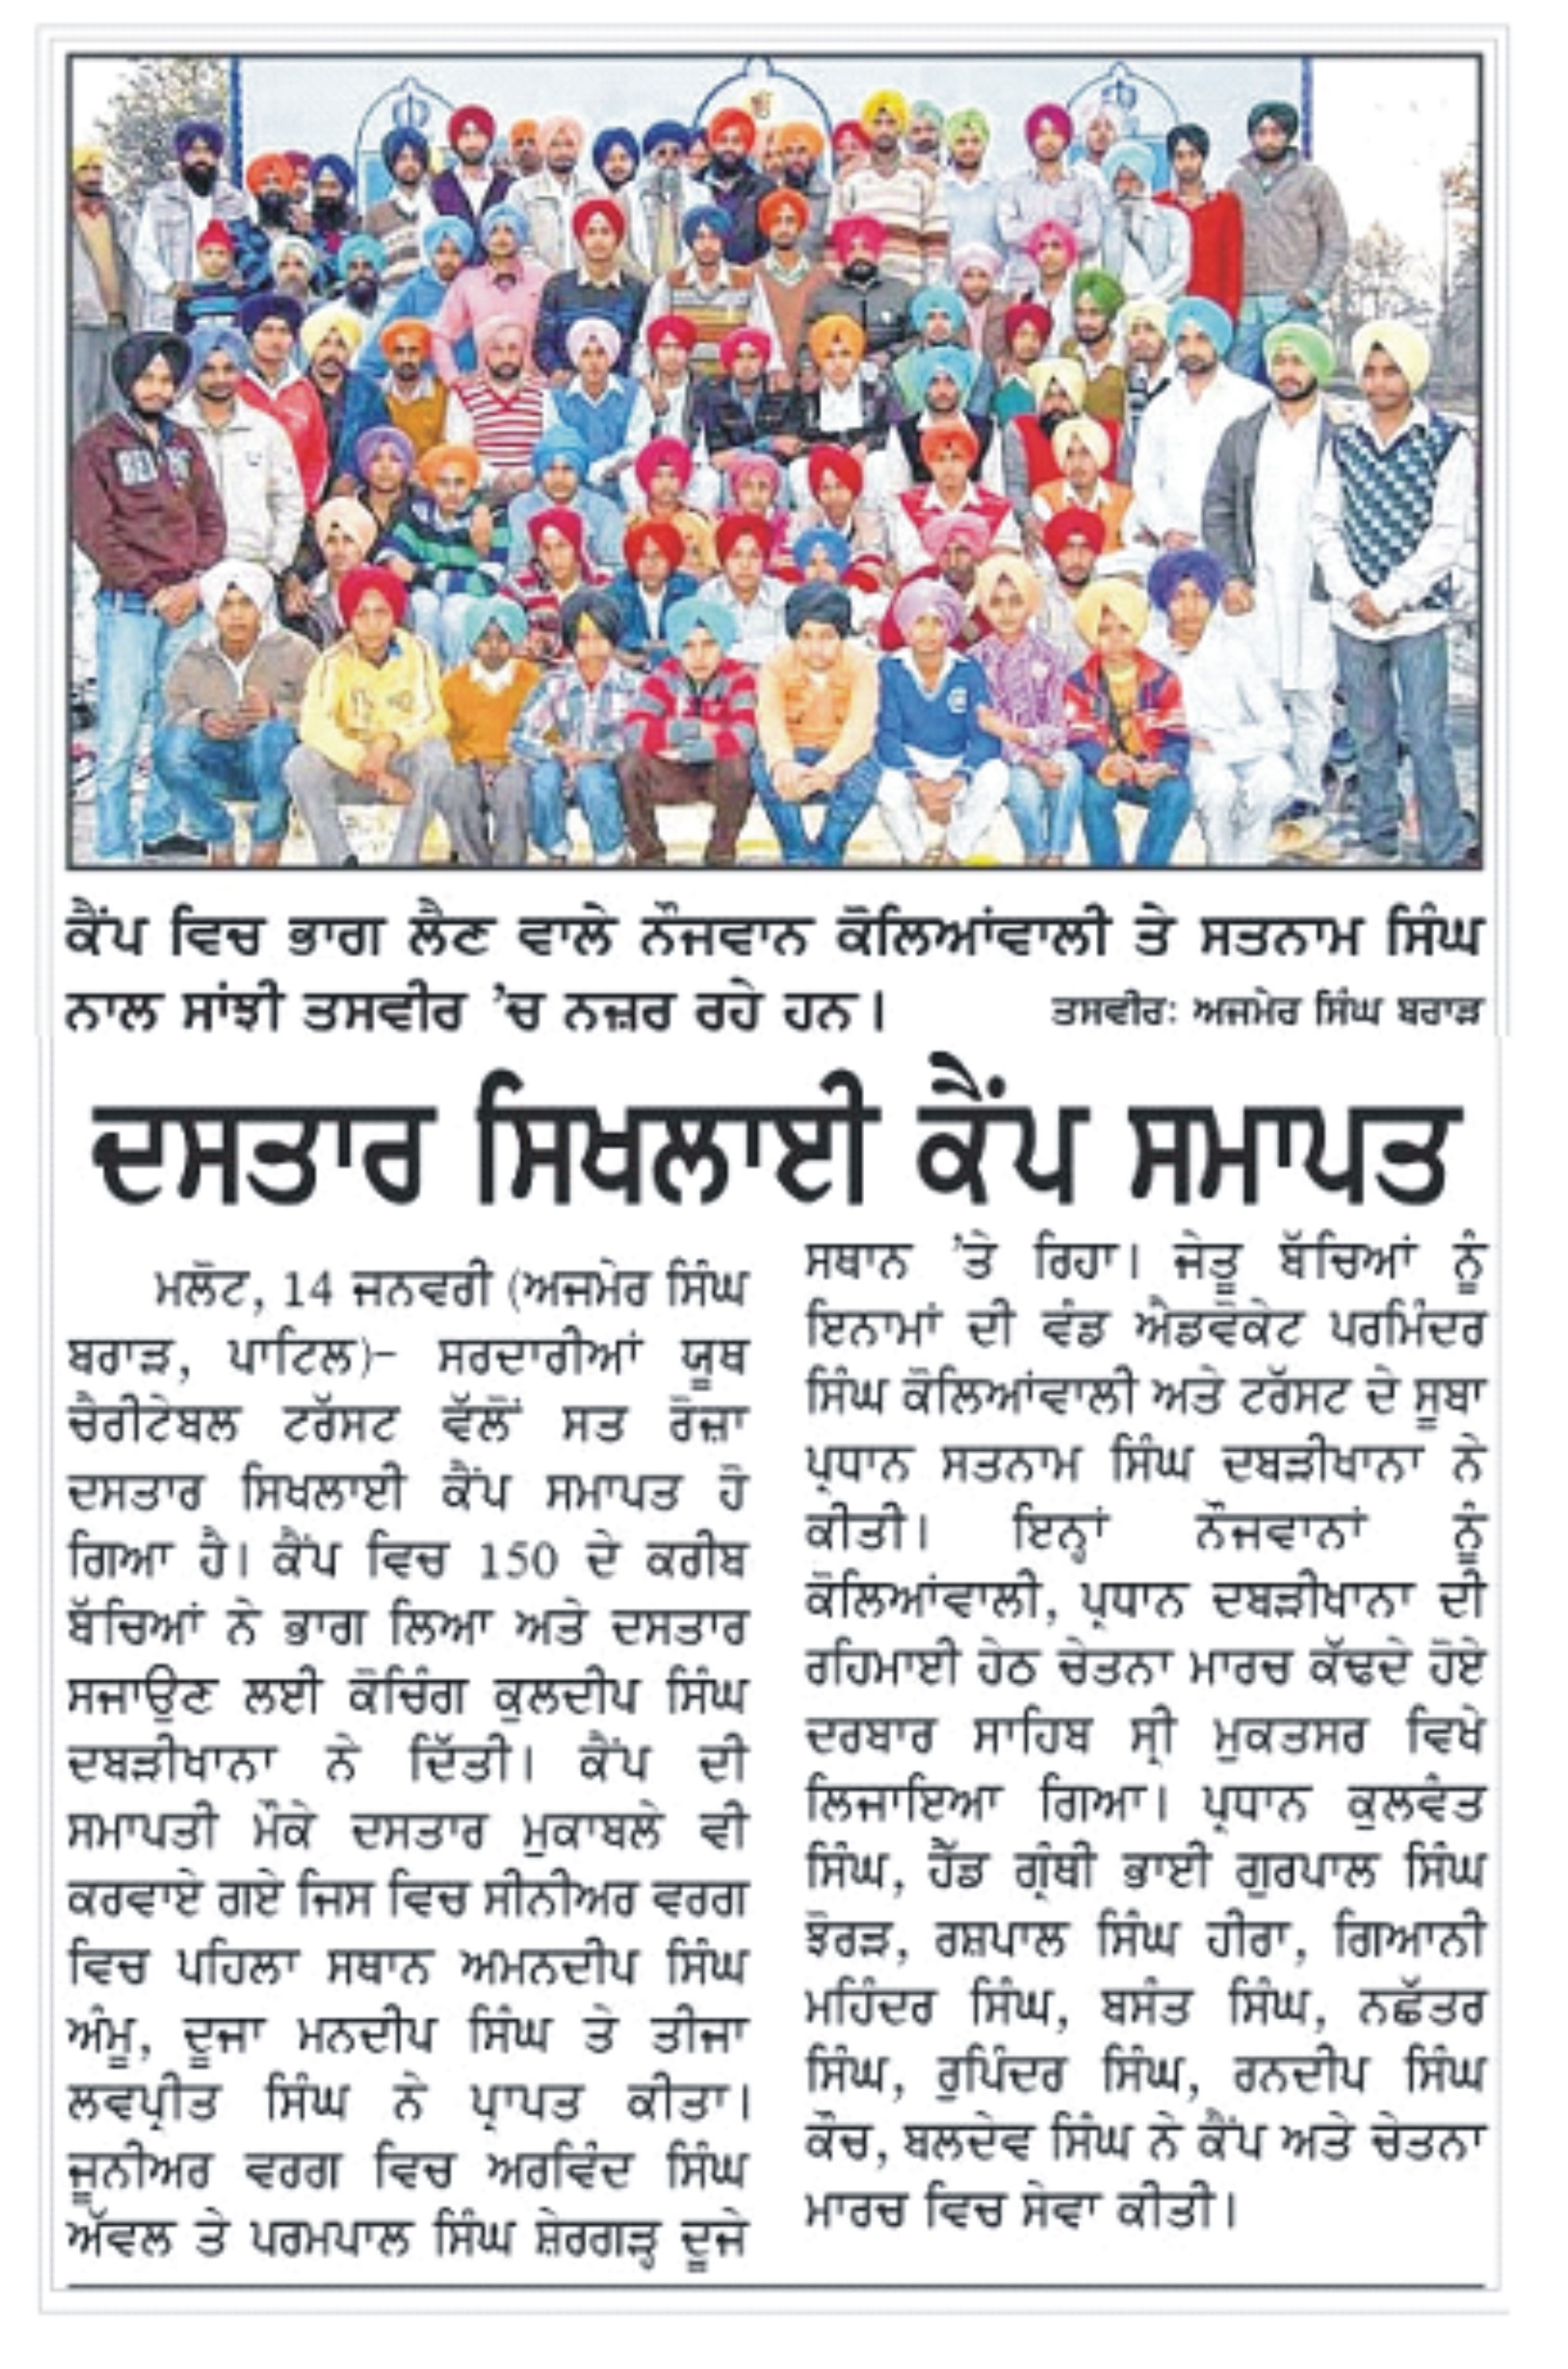 Dastar Competitions